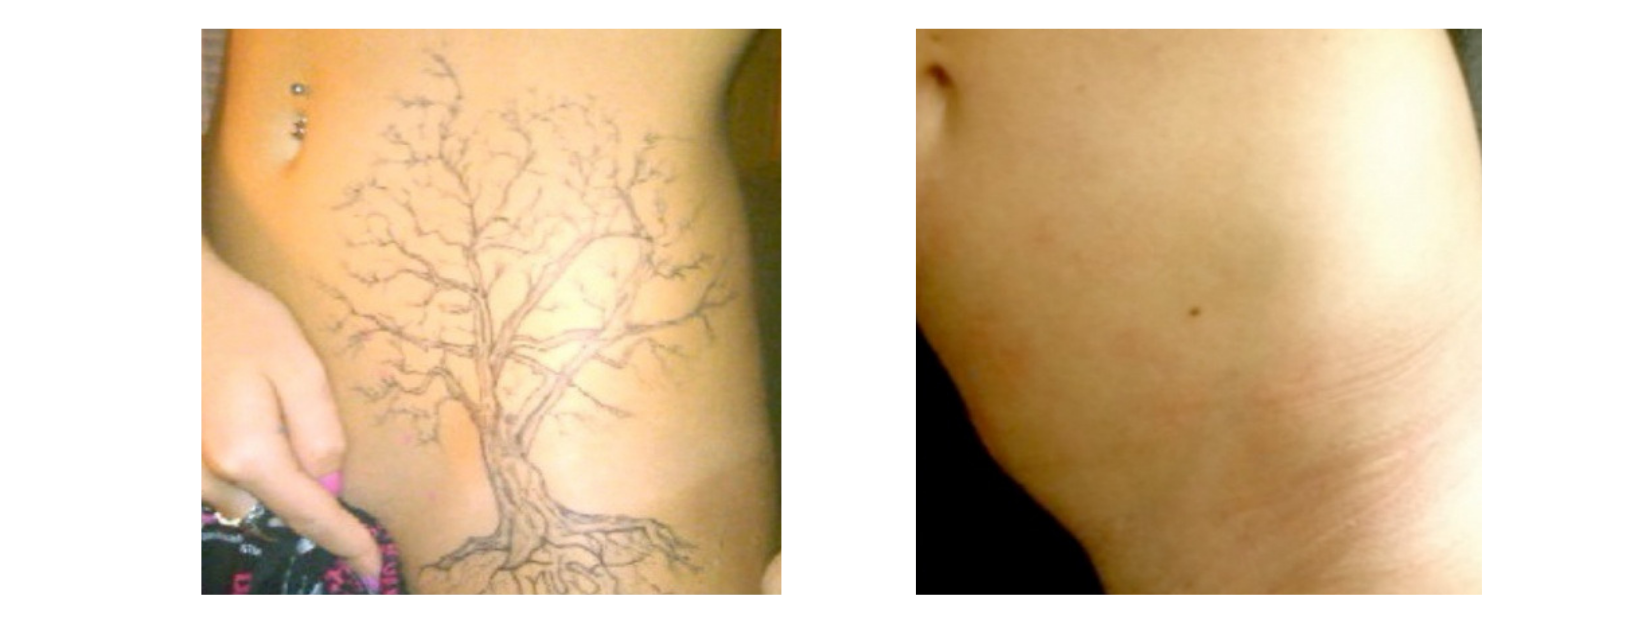 Tattoo Removal Stomach and Hip Dark Tones